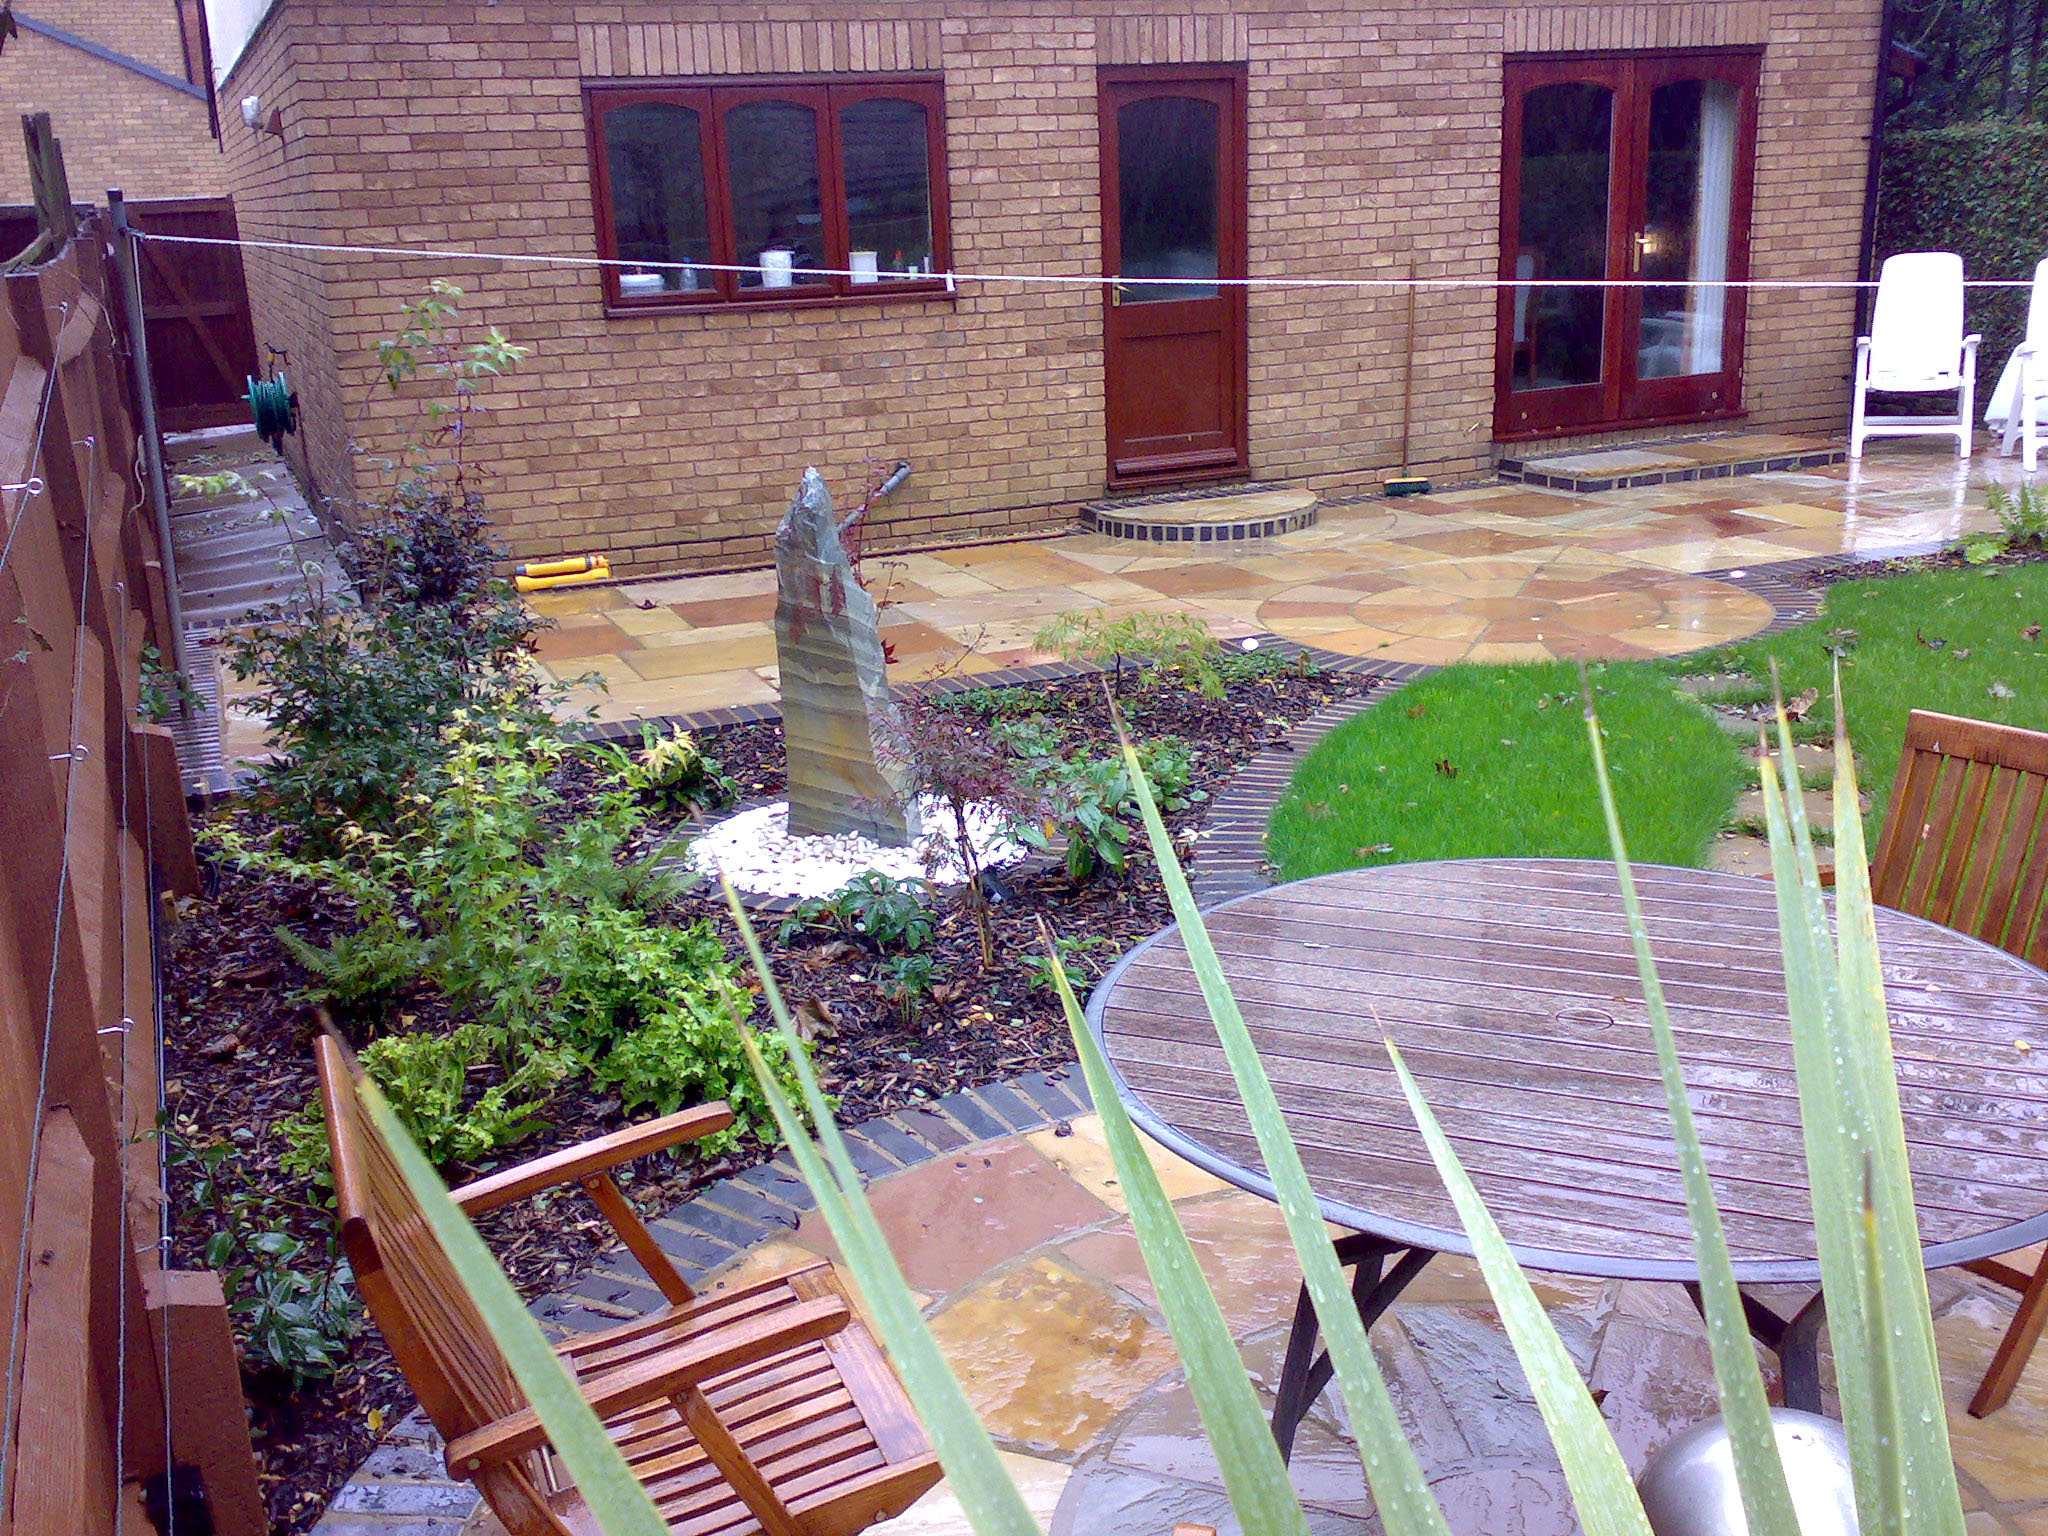 View towards house looking at the circular seating area with water feature in the midground